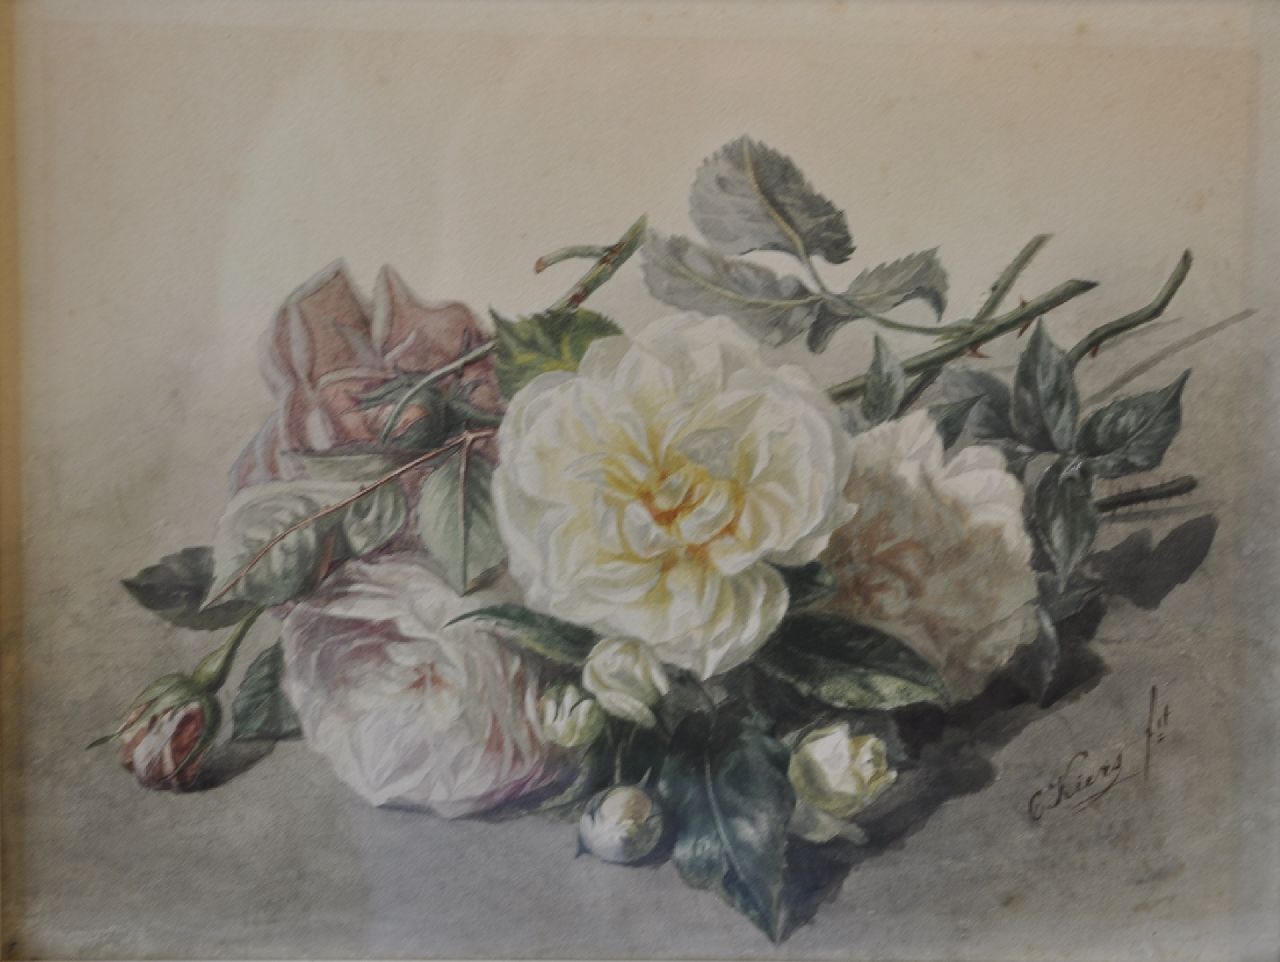 Kiers C.I.  | 'Catharina' Isabella Kiers | Watercolours and drawings offered for sale | Roses, watercolour on paper 24.0 x 31.5 cm, signed l.r.